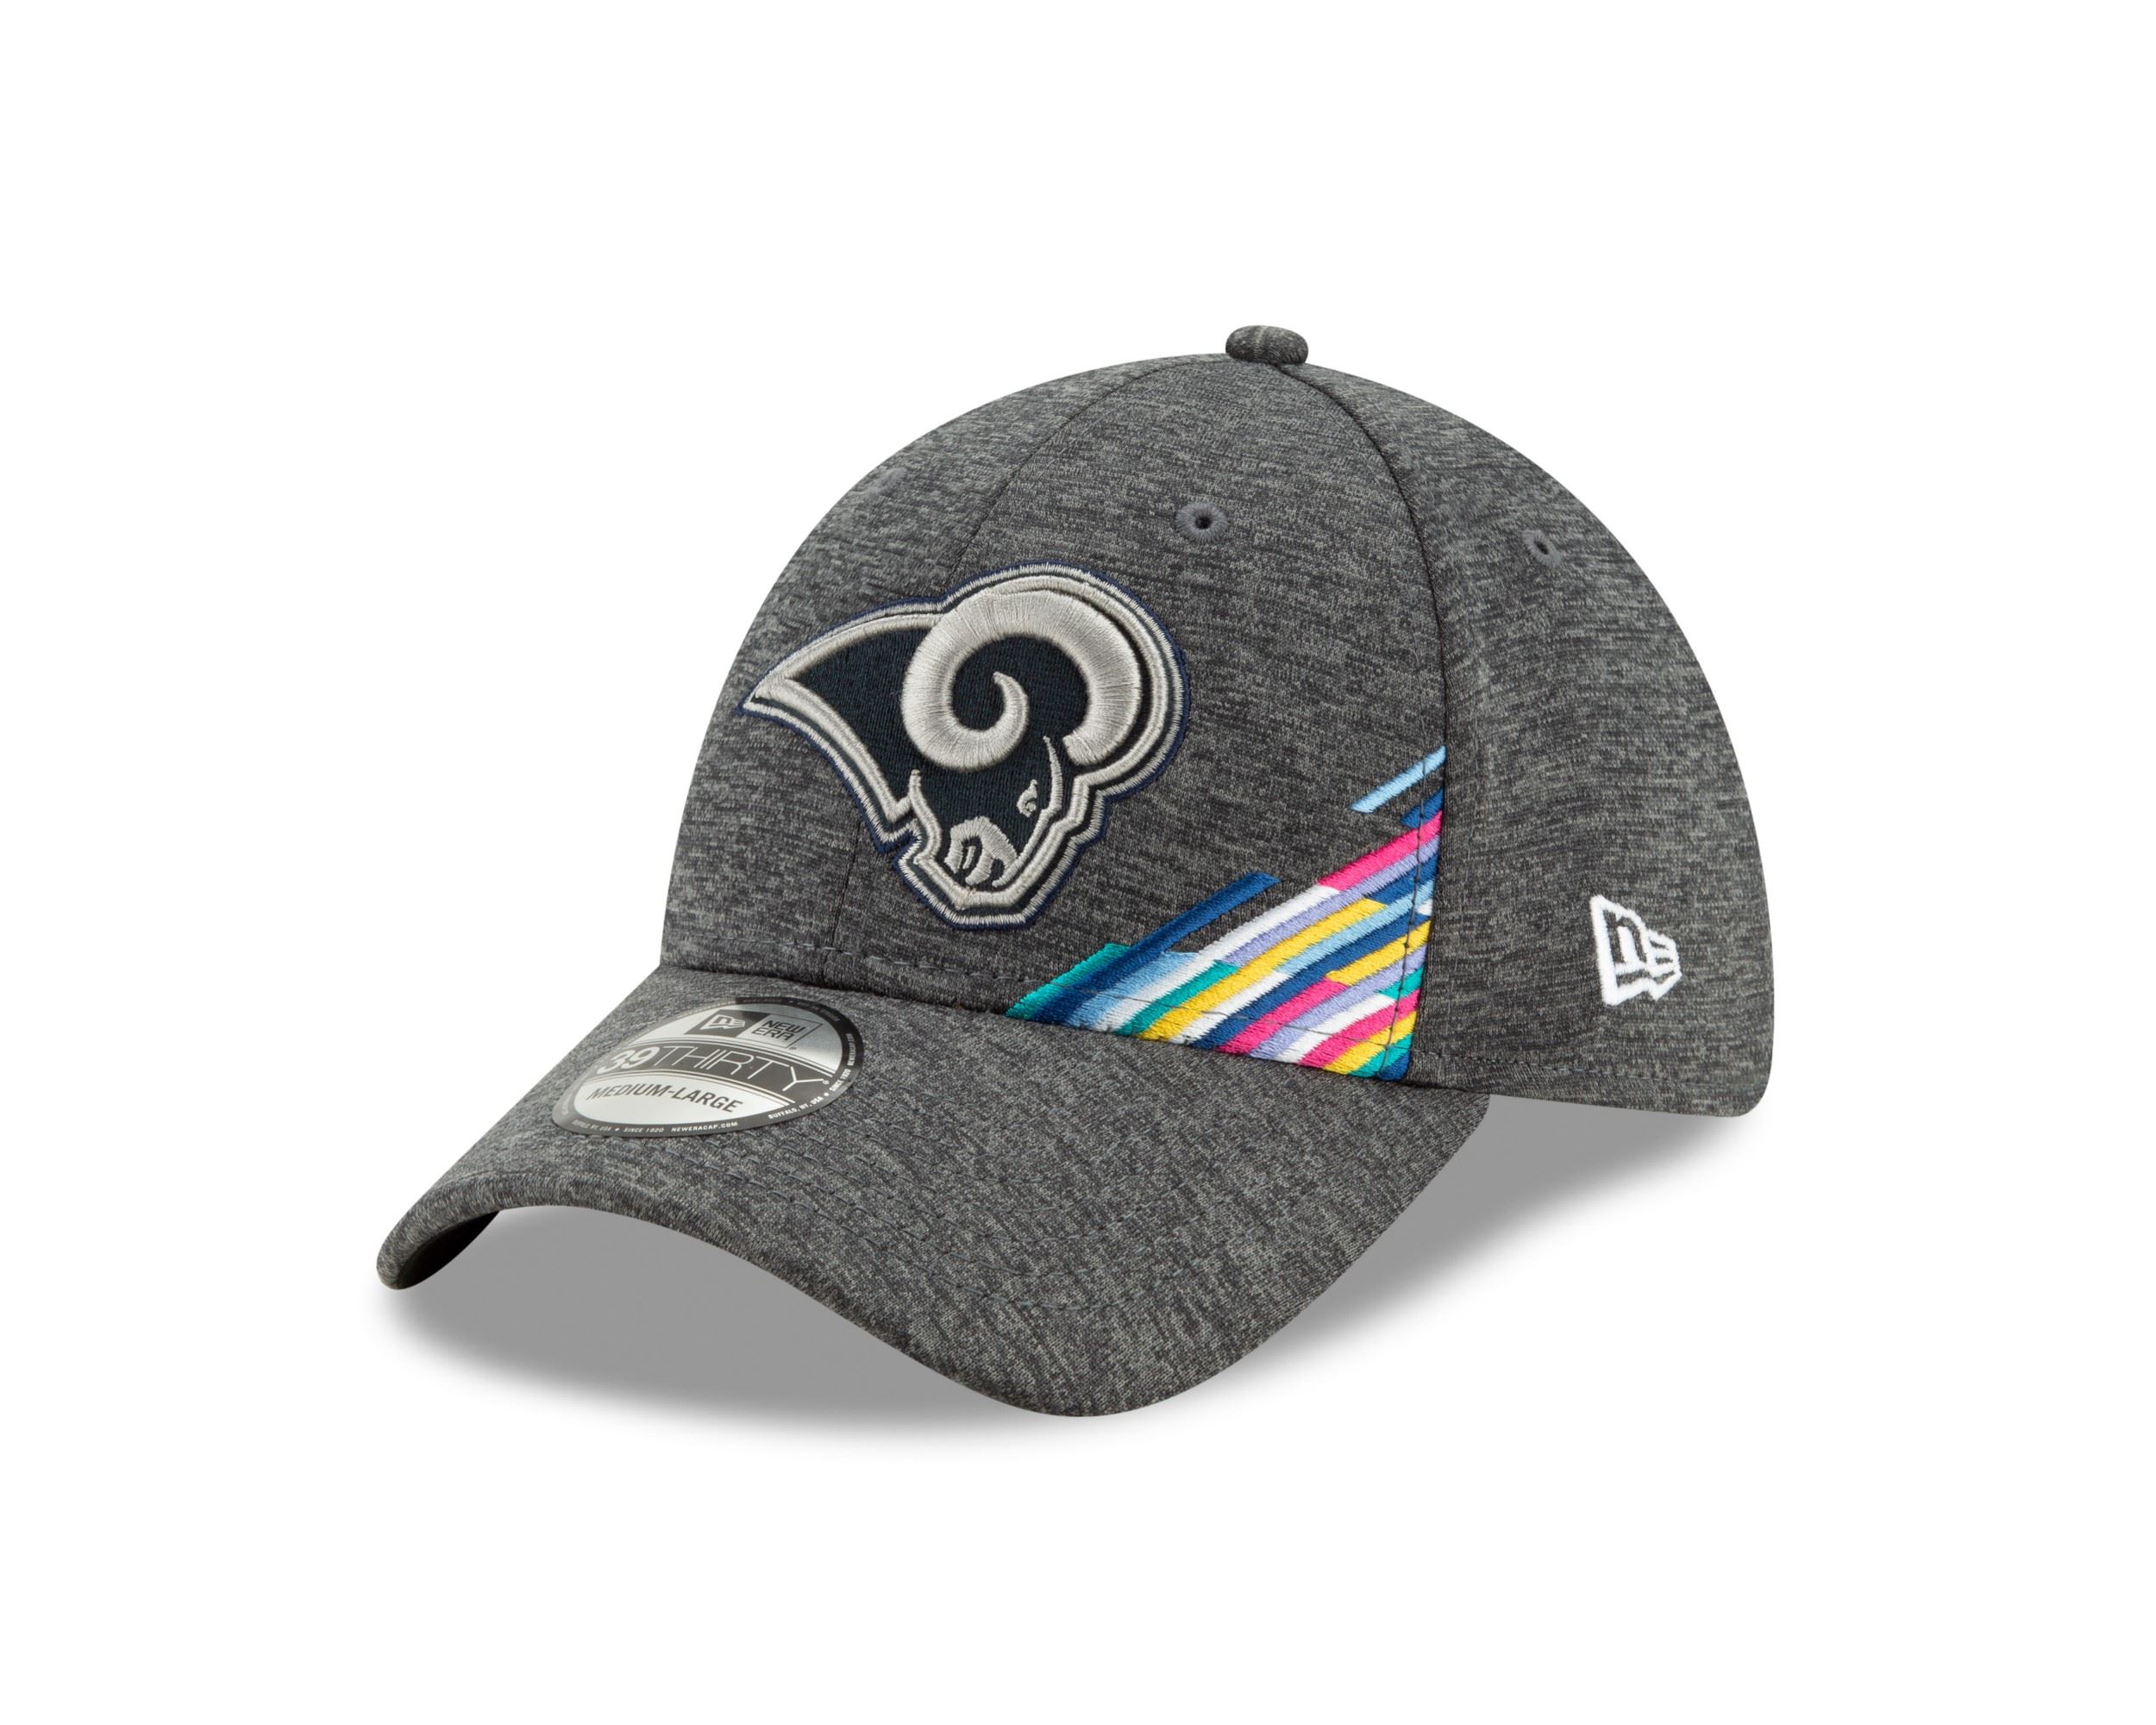 Los Angeles Rams  NFL 2019 On Field Crucial Catch 39Thirty Cap Graphite New Era